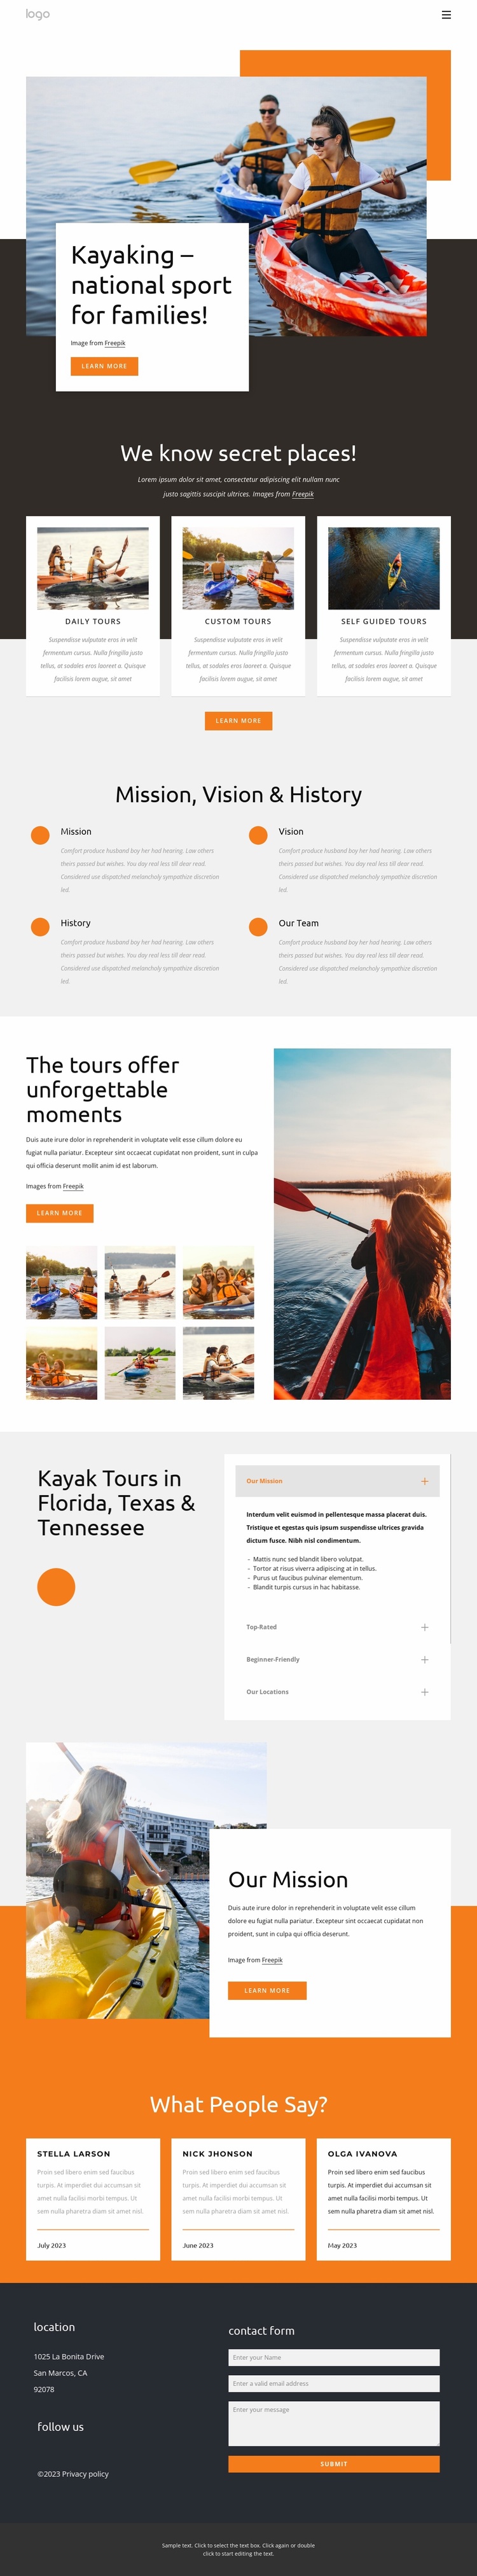 Kayaking - national sport for families Landing Page